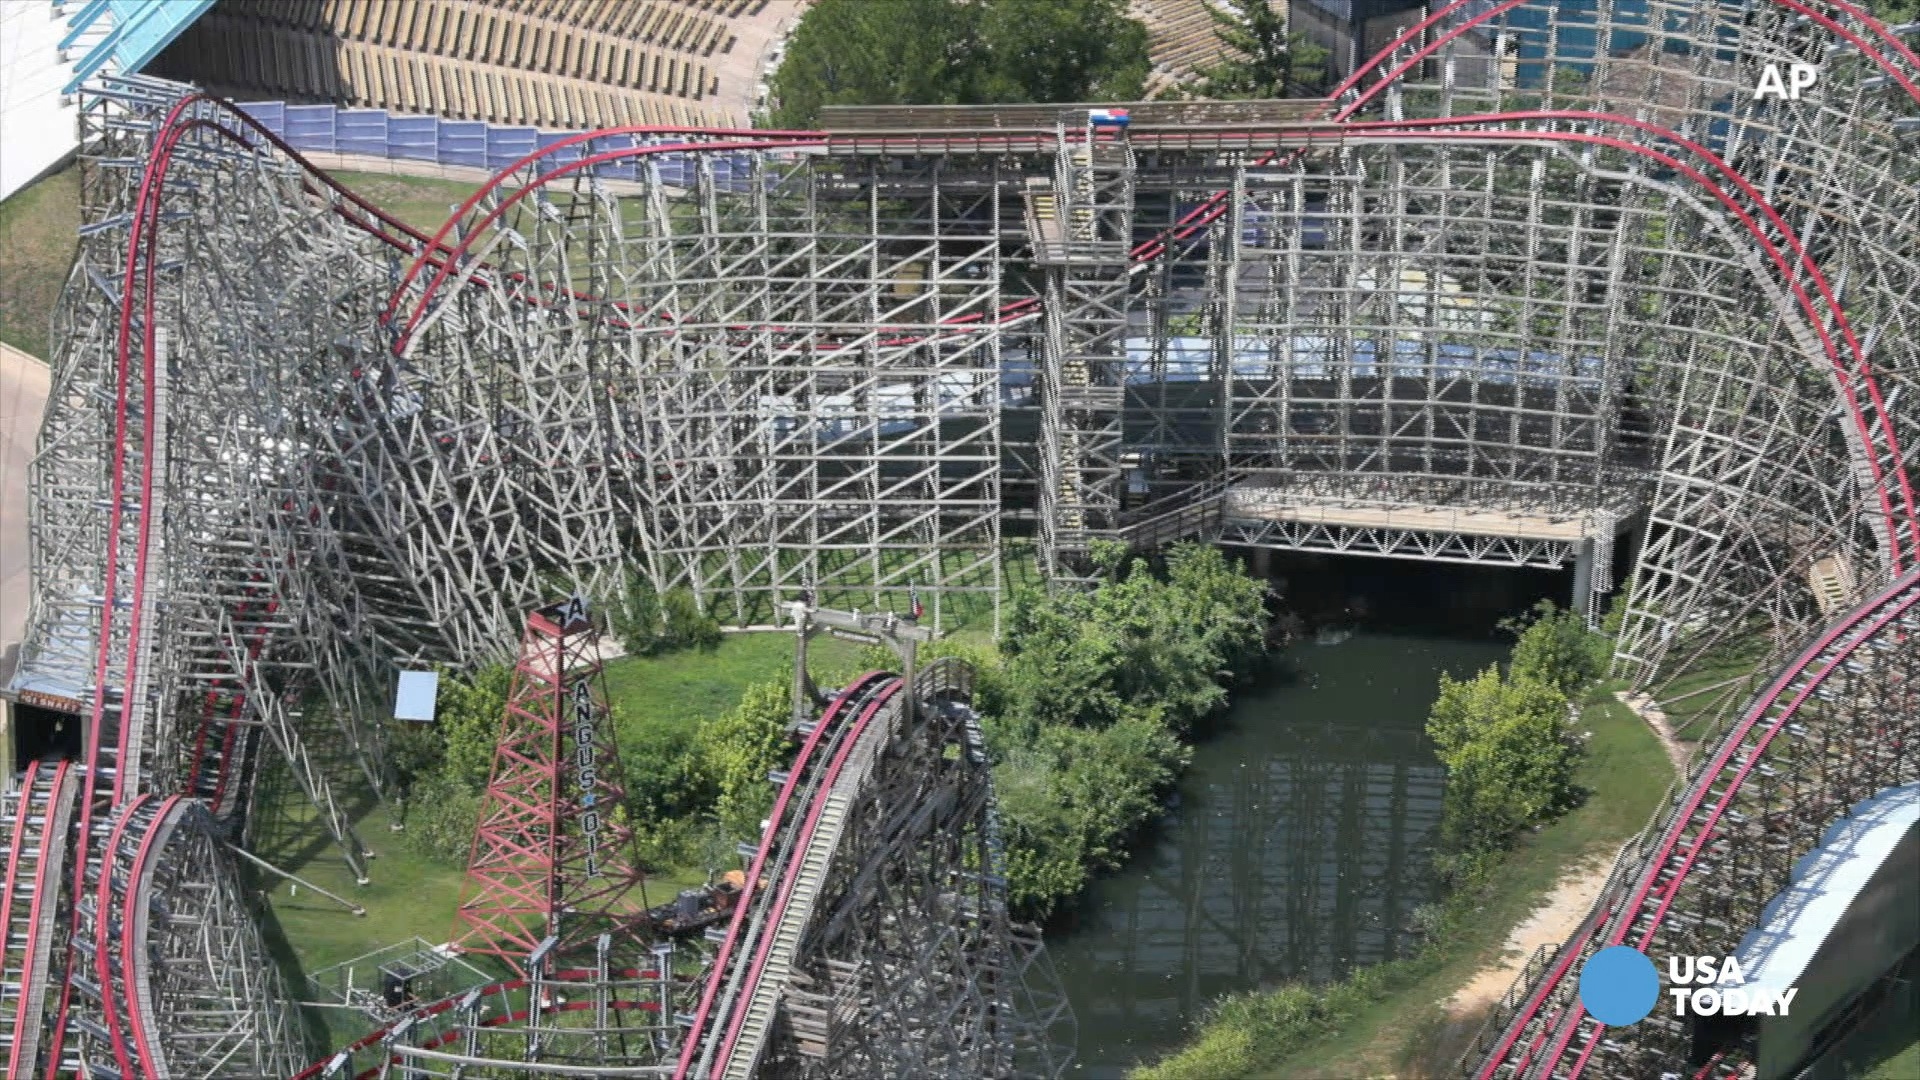 Six Flags El Toro roller coaster closes indefinitely due to structural  damage, report says 